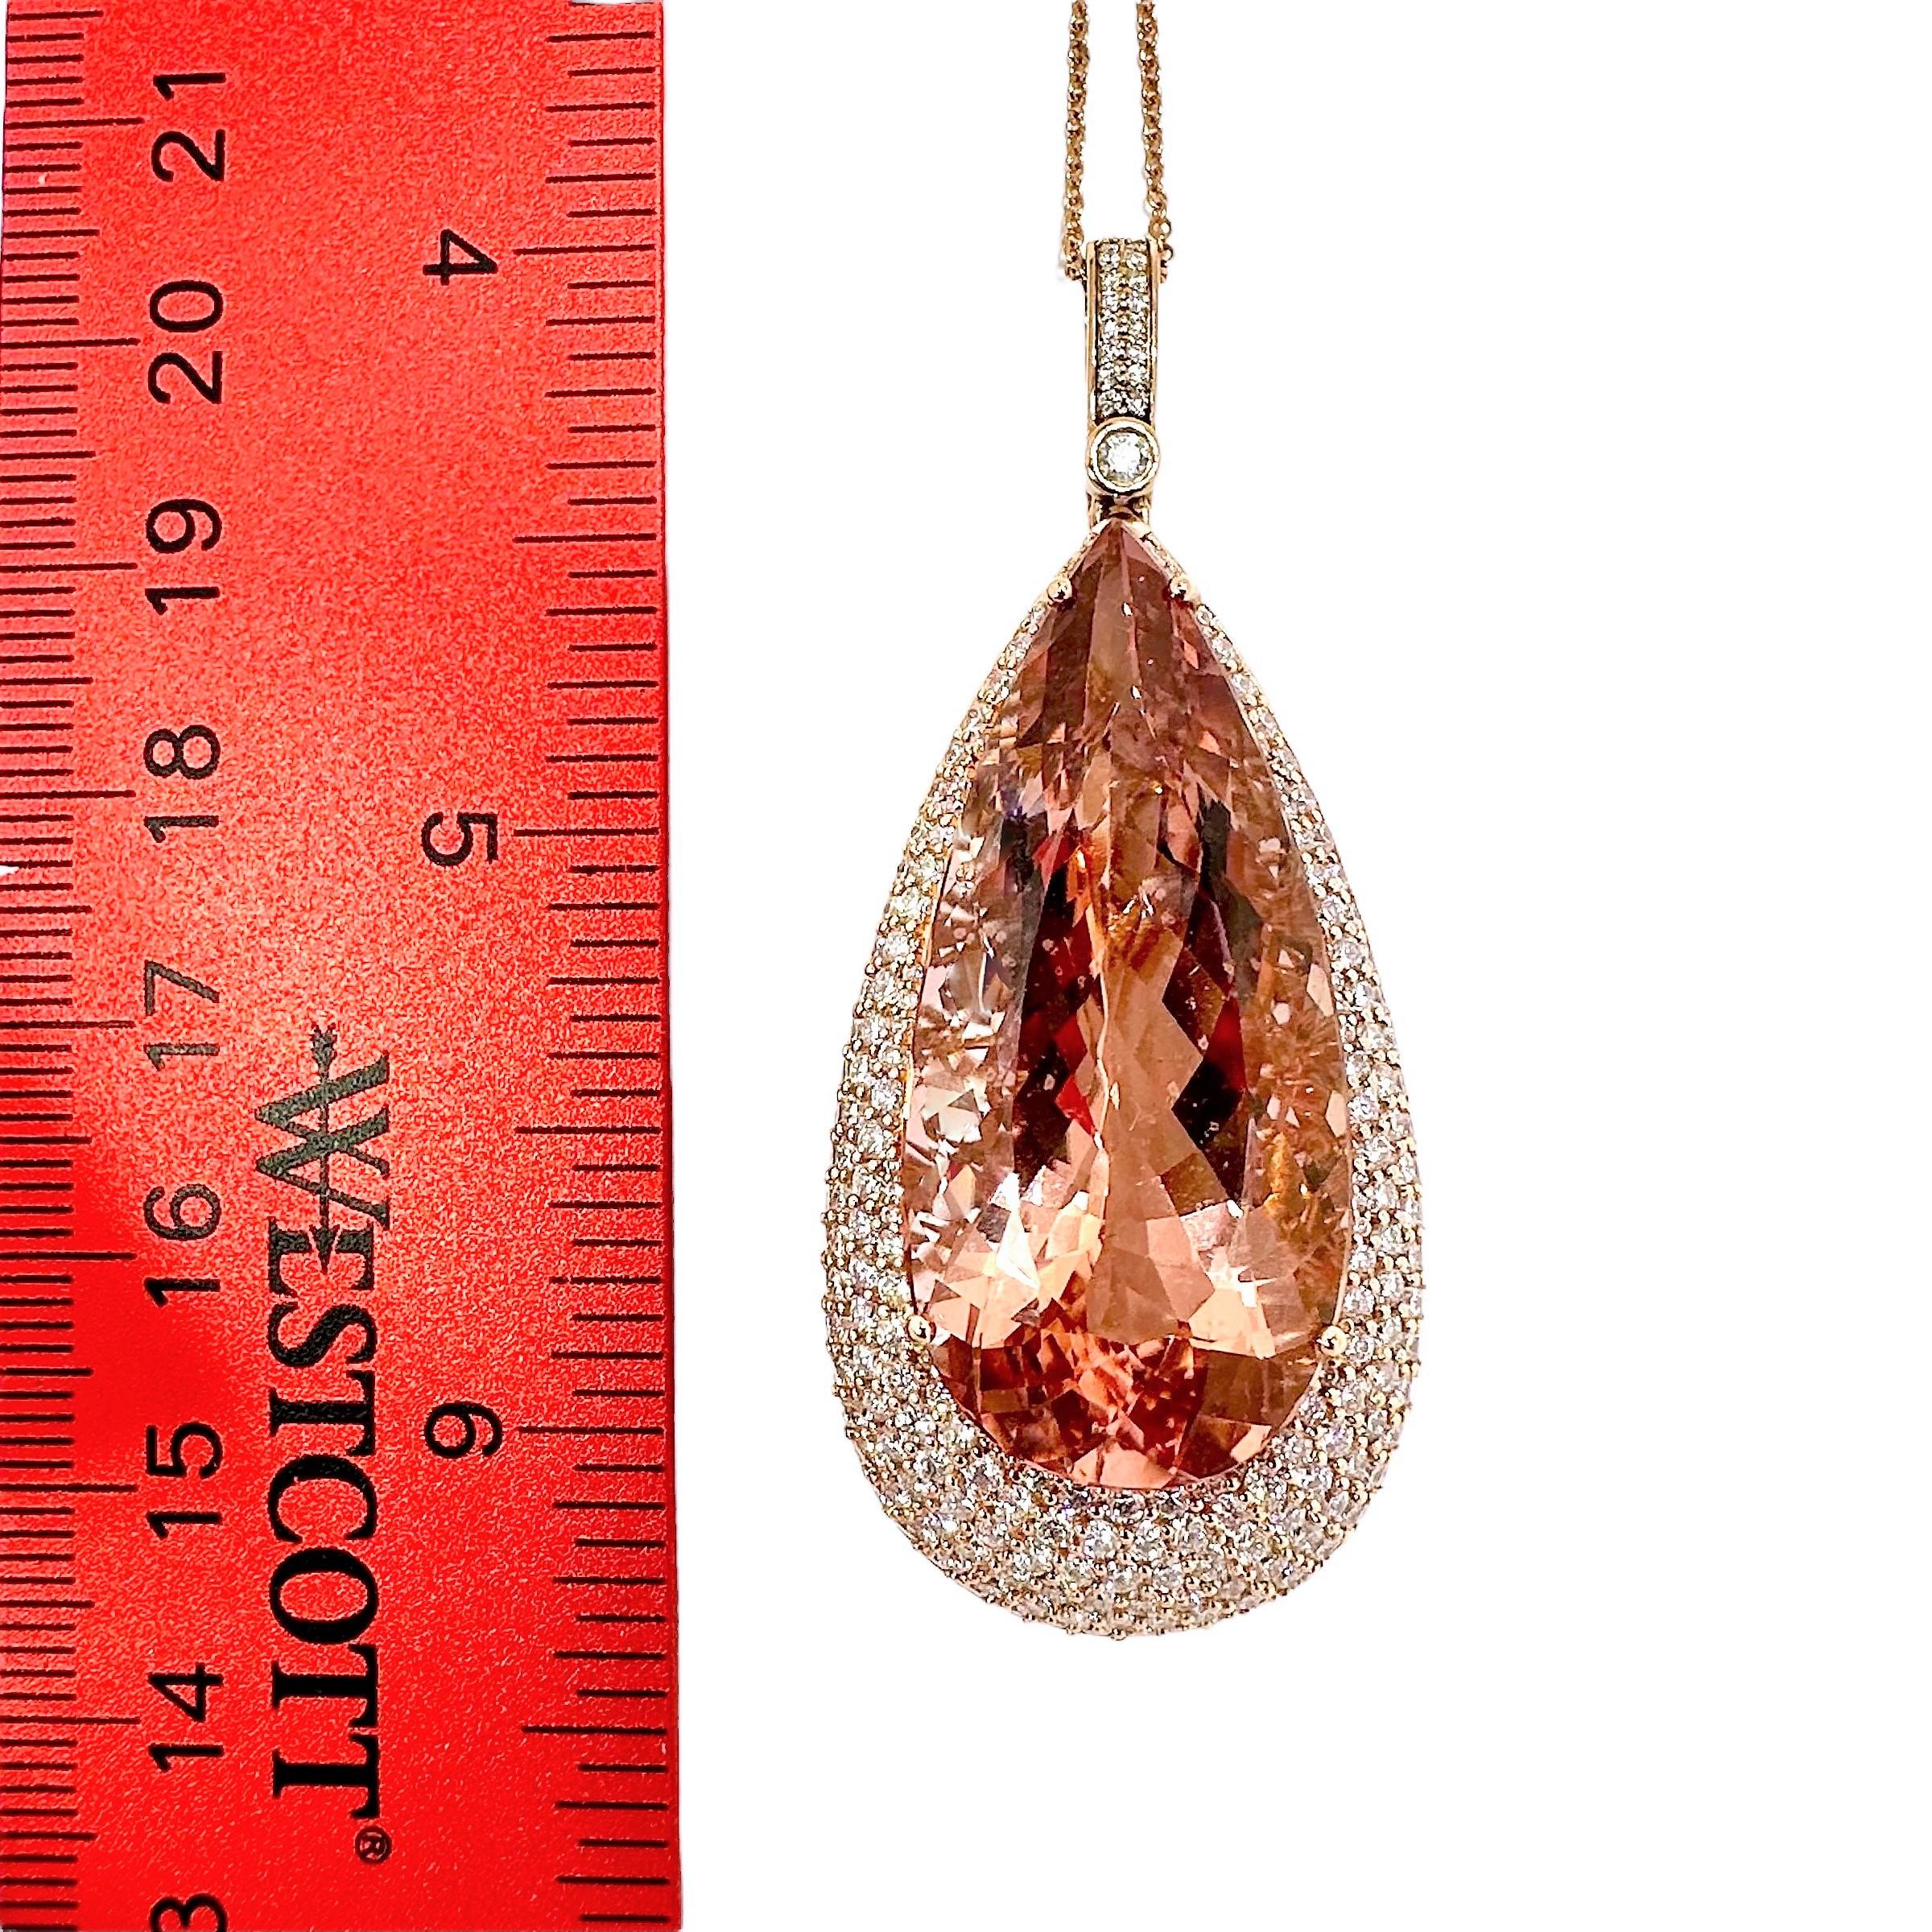 Modern Elegant 18K Pink Gold, 40.00ct Morganite and Diamond Pendant with Chain For Sale